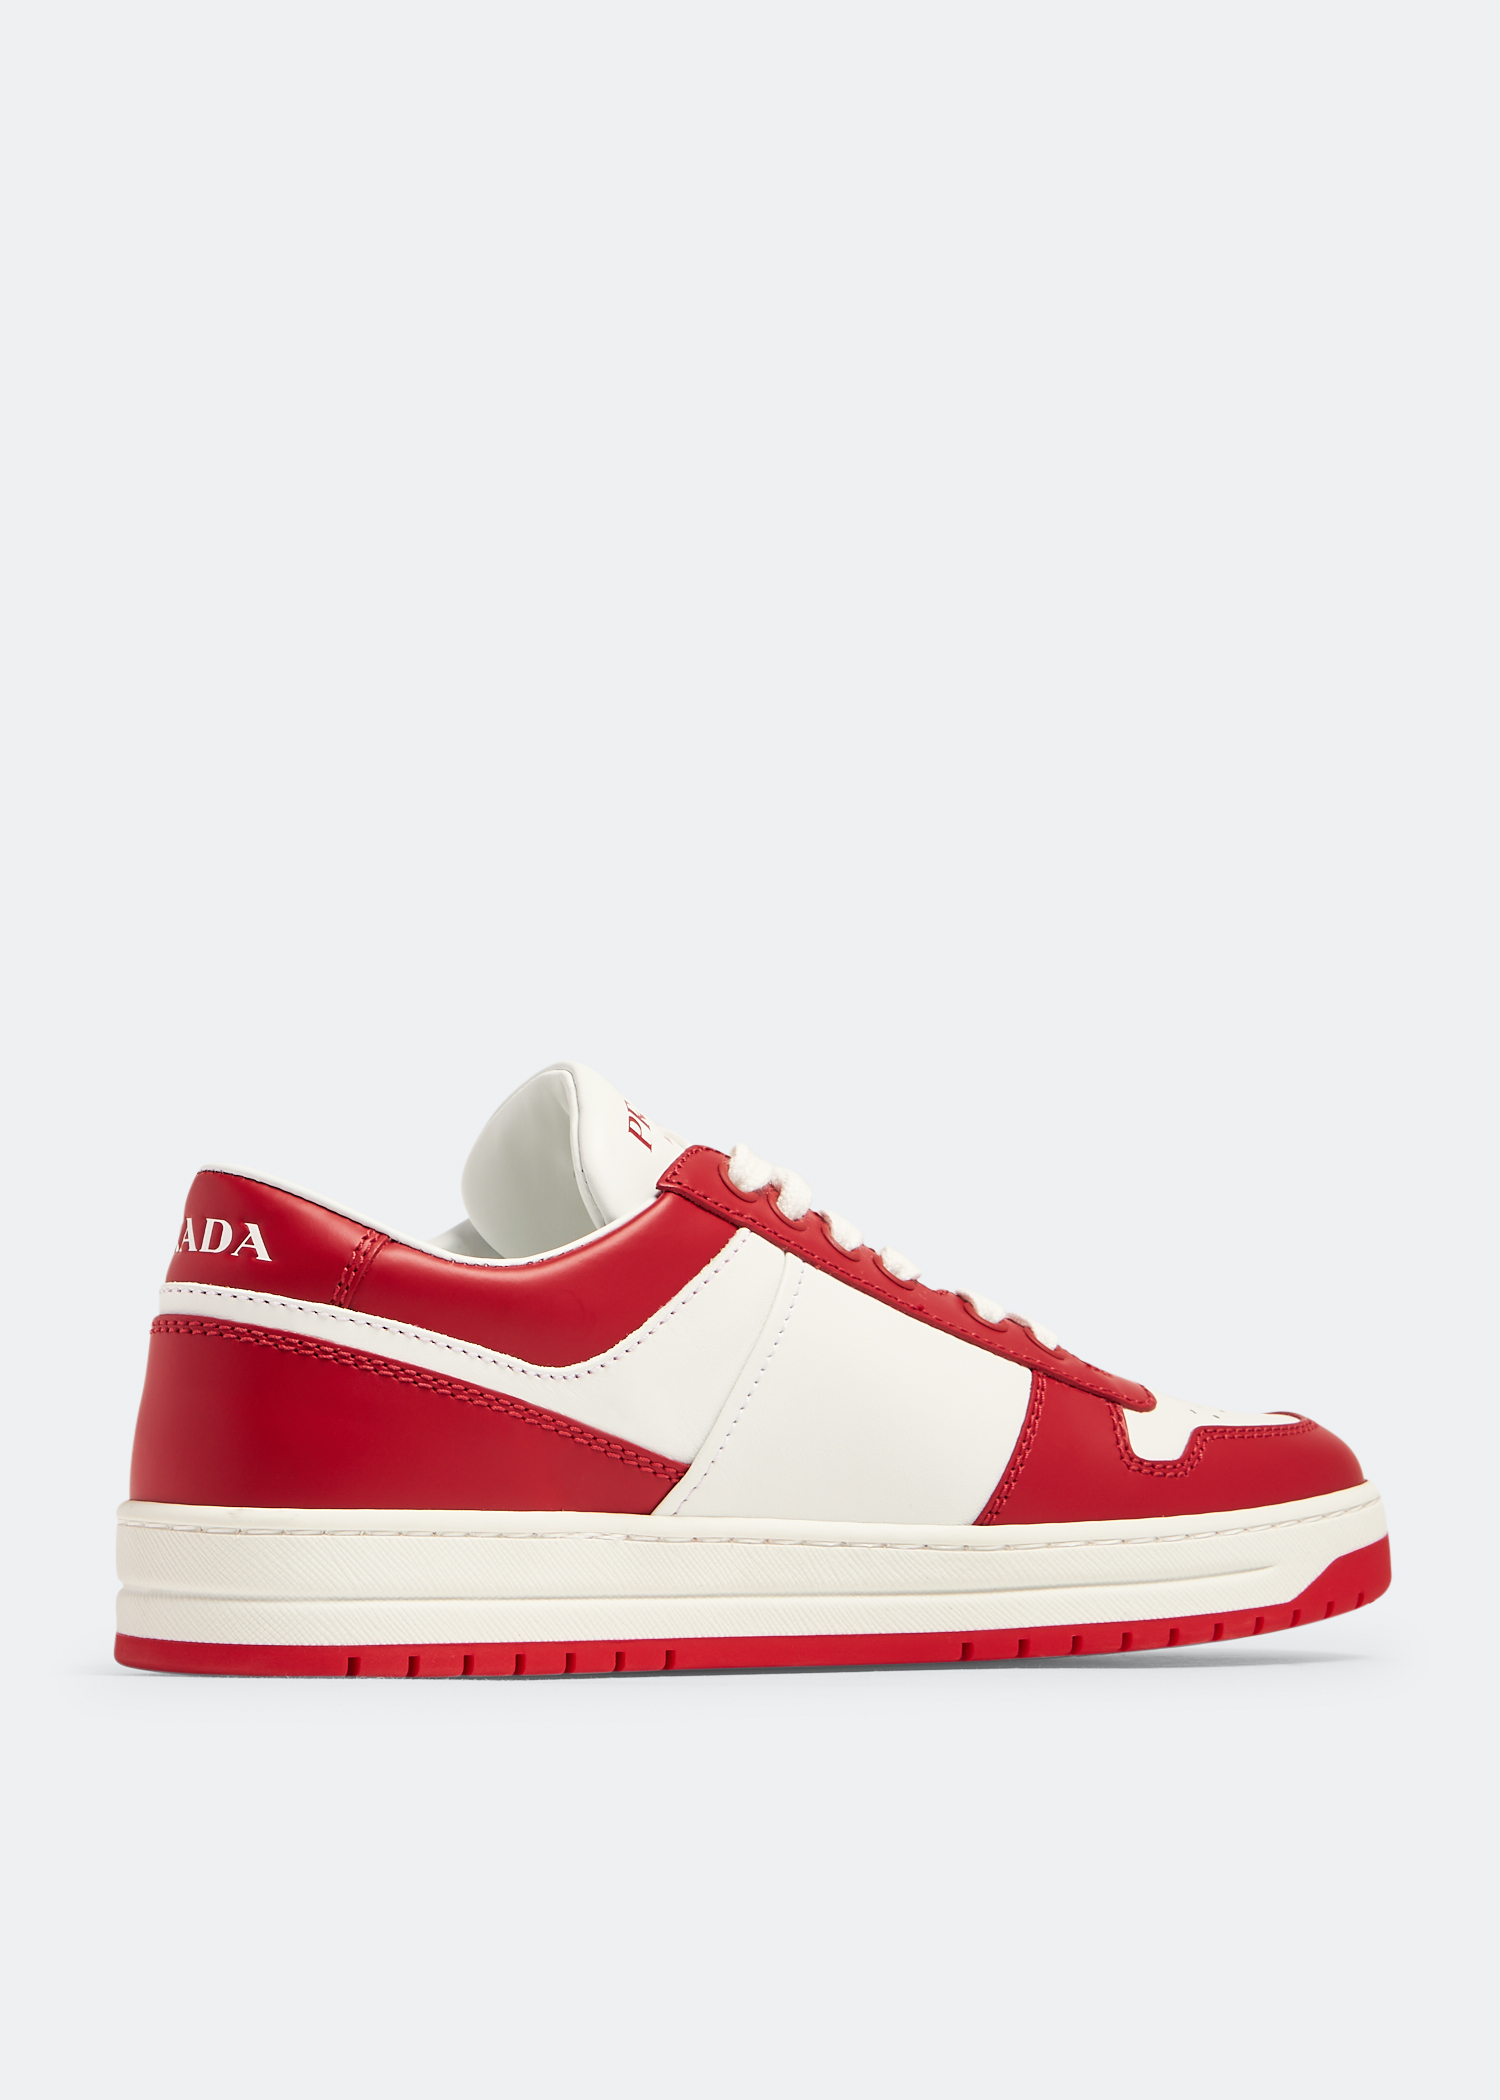 Prada Downtown leather sneakers for Women - Red in Kuwait | Level 